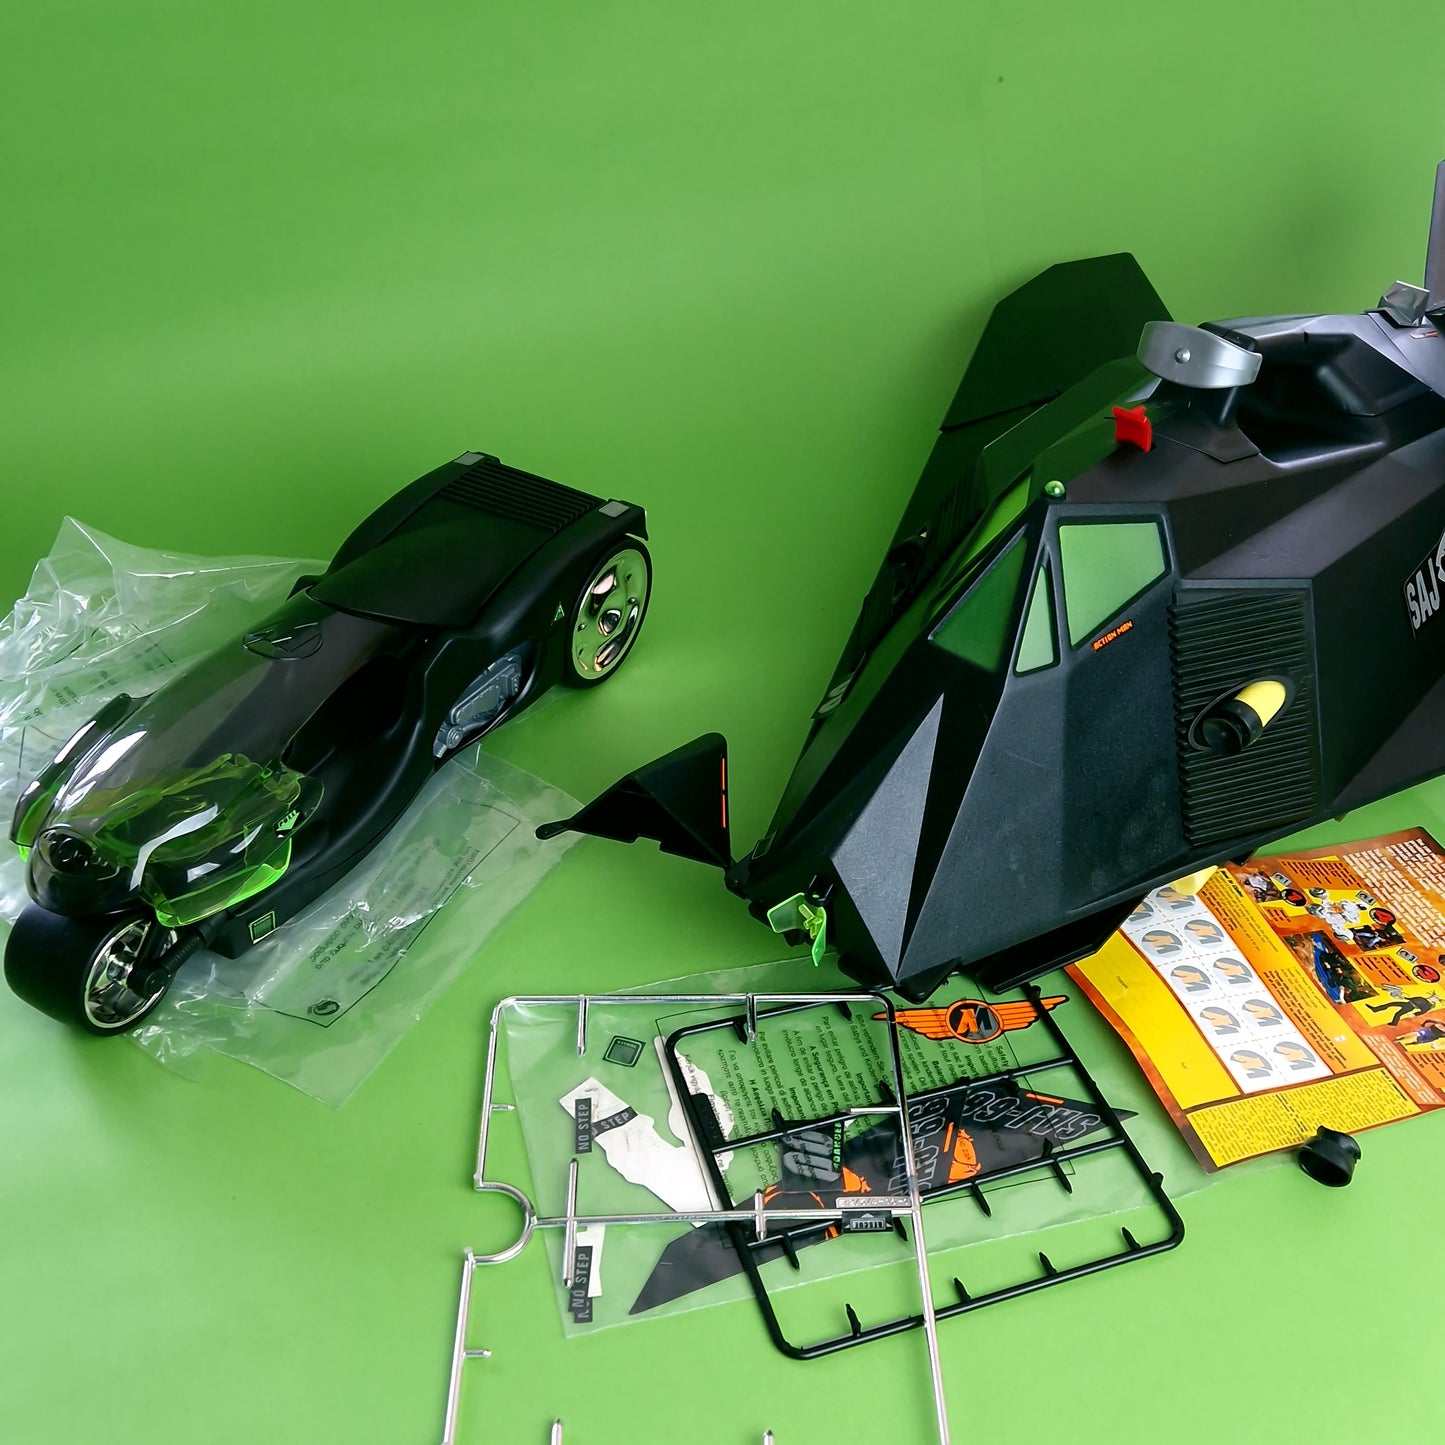 ACTION MAN ☆ STEALTH JET & MOTORCYCLE for Figure ☆ Vintage HASBRO Boxed 90's Loose